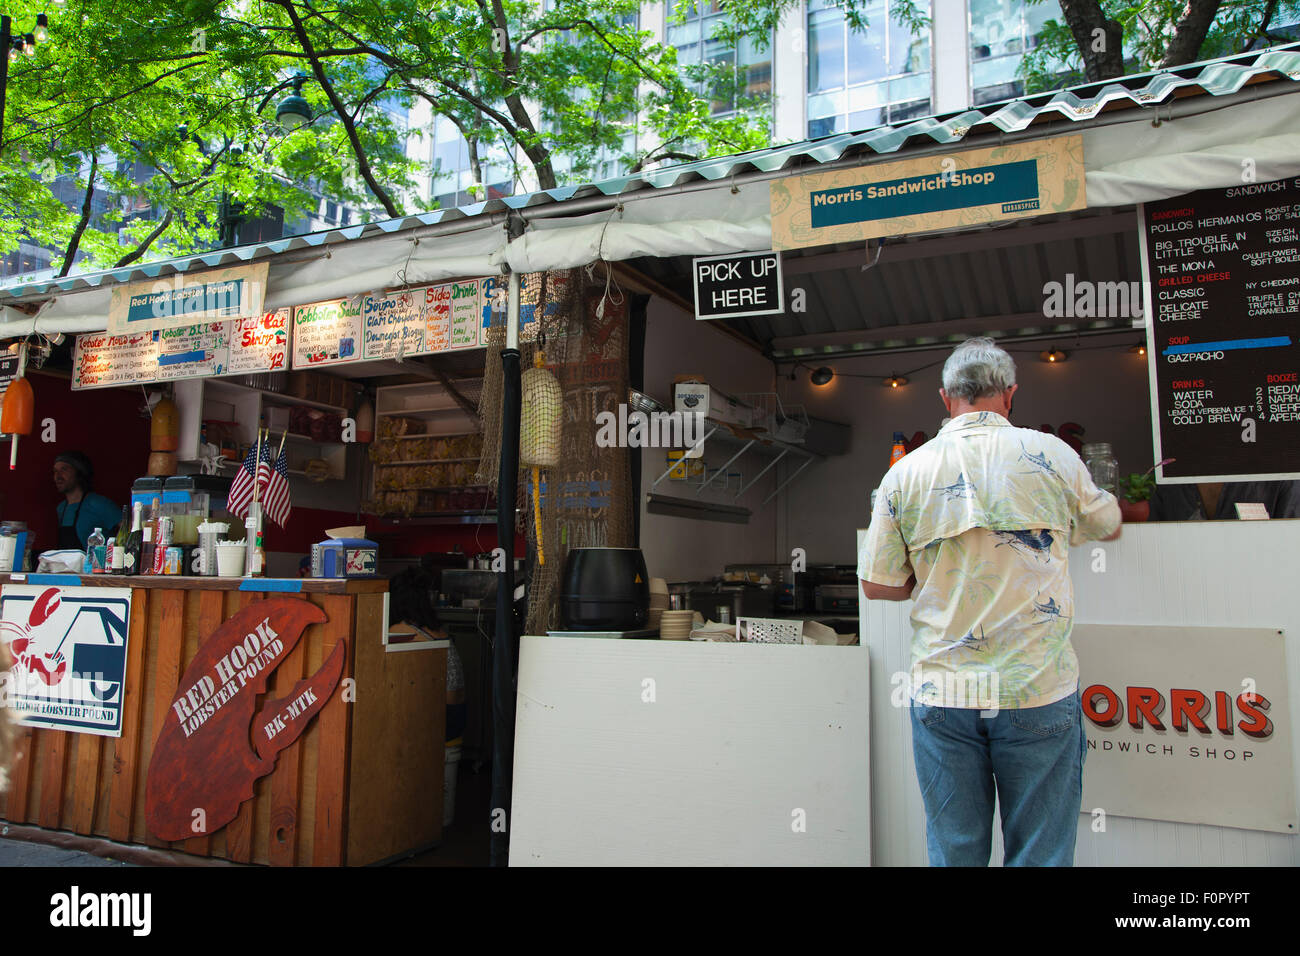 USA, New York State, New York City, Manhattan, Broadway Bisse saisonale Popup-Imbissbuden in Greeley Square Park. Stockfoto